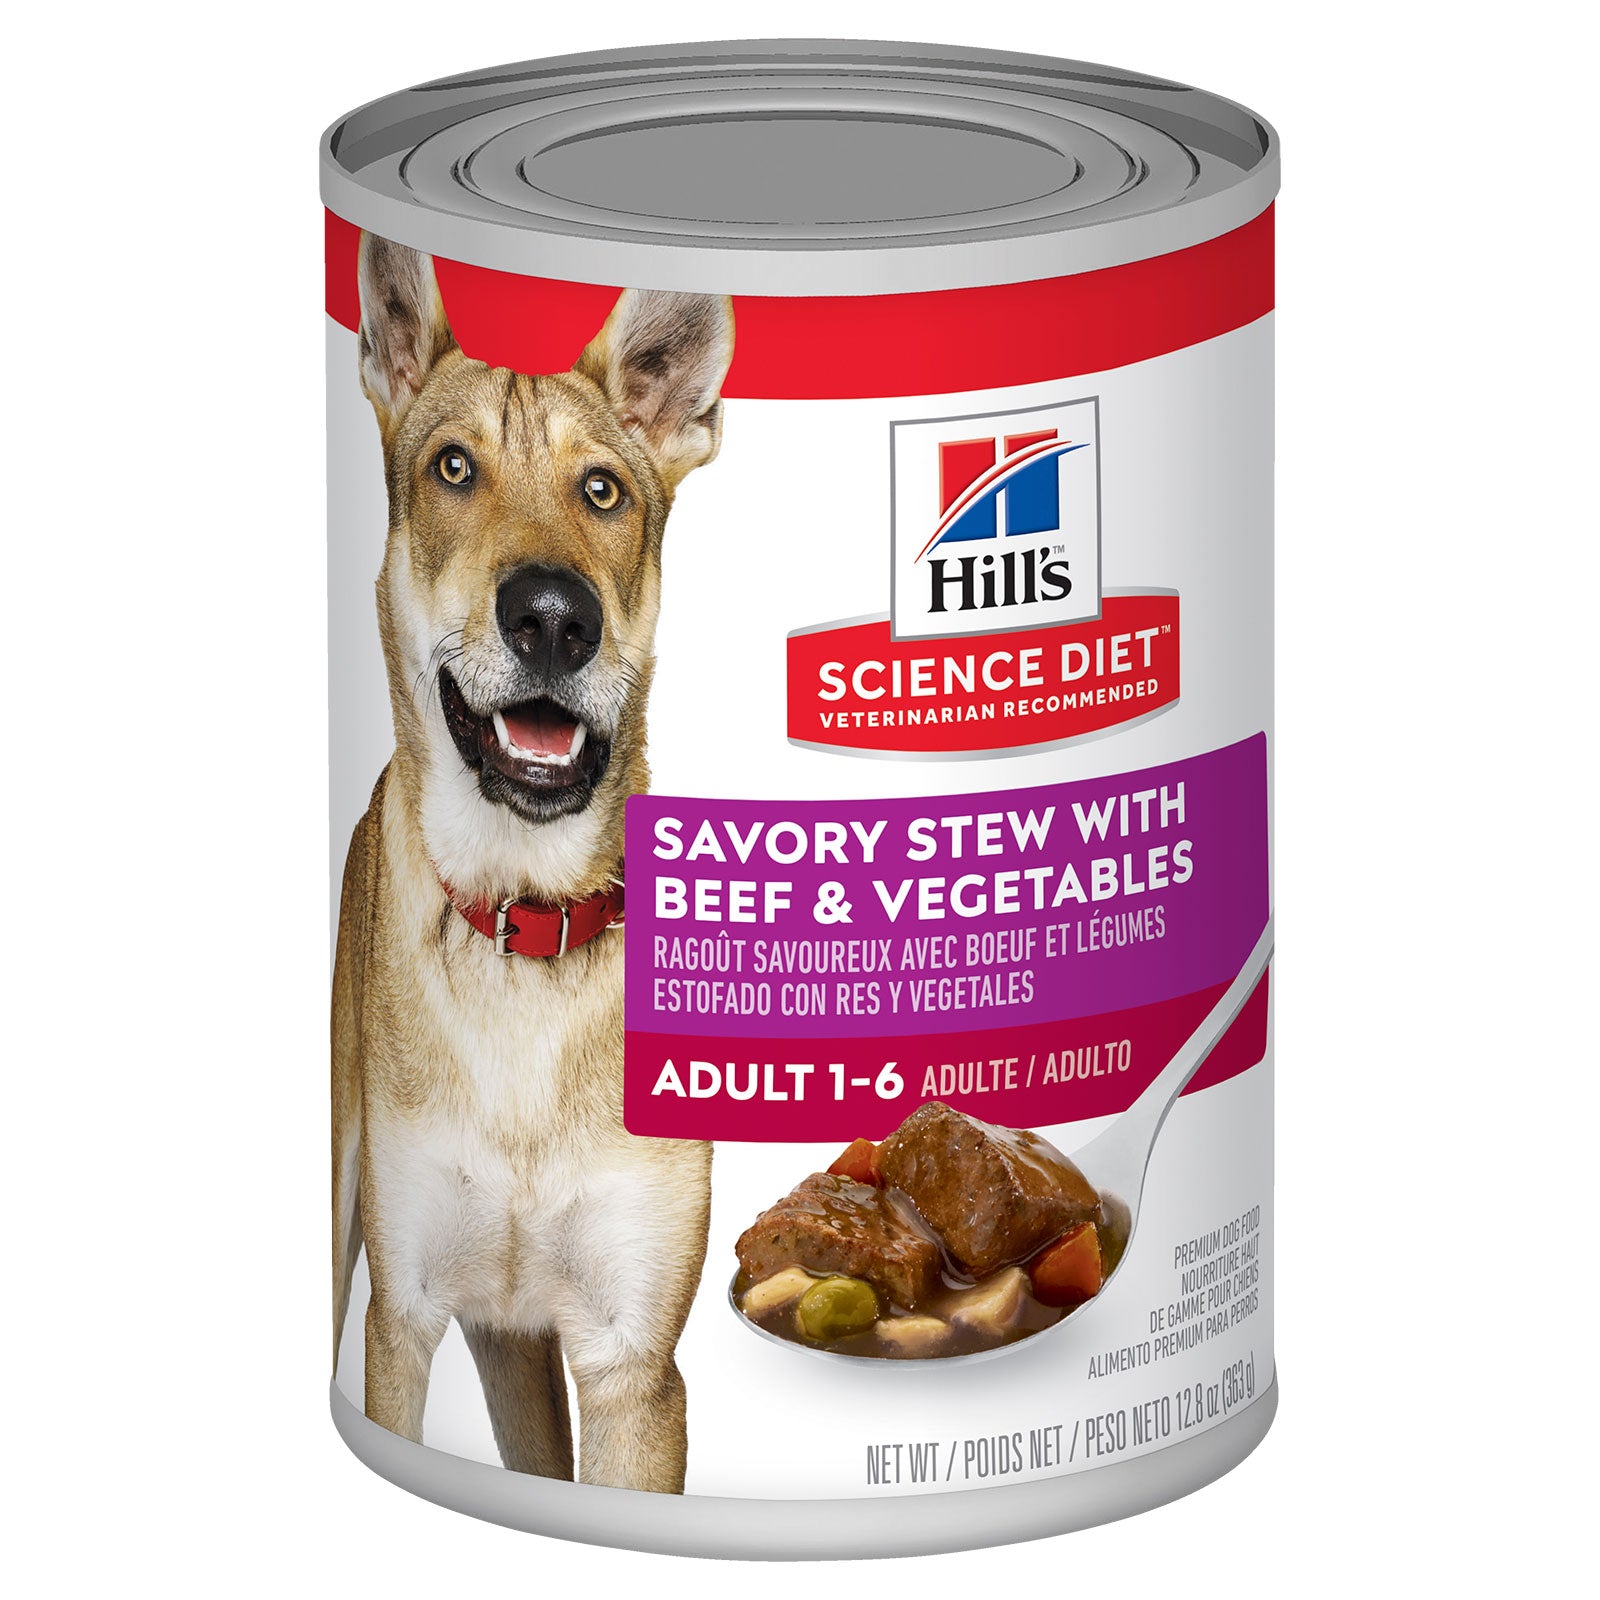 Hill's Science Diet Dog Food Can Adult Savoury Stew Beef & Vegetables